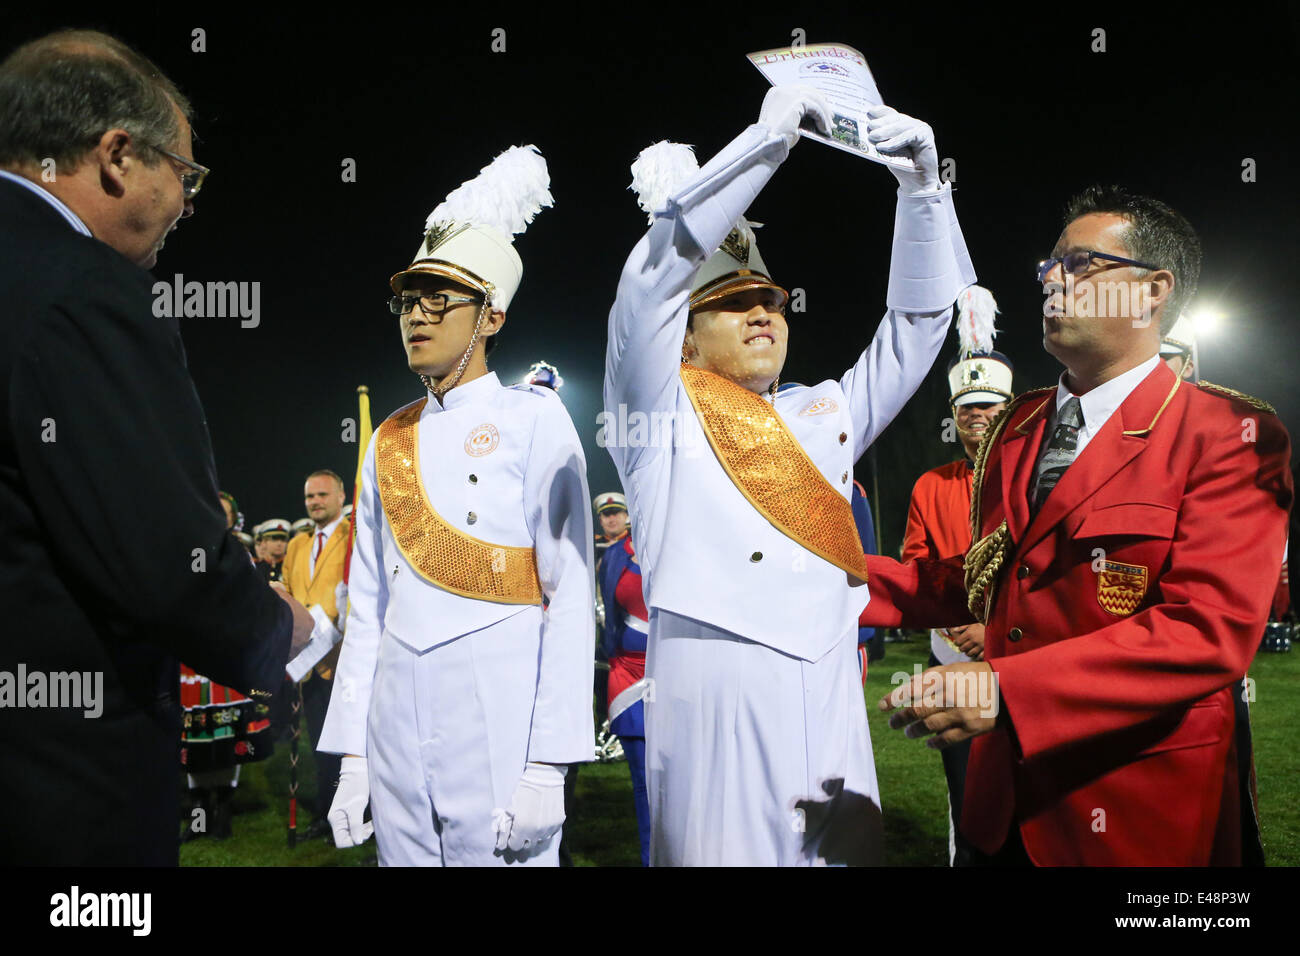 Rastede, Germany. 5th July, 2014. Guo Yuanchi (2nd R), conductor of Beihang University's marching band, shows the certificate of wining the highest score of a marching band's competition during the 59th International Rasteder Music Day in Rastede, Germany, on July 5, 2014. More than 50 bands and thousands of musicians from 6 countries and regions took part in the three-day International Rasteder Music Day, one of the oldest music festivals in Germany. Credit:  Zhang Fan/Xinhua/Alamy Live News Stock Photo